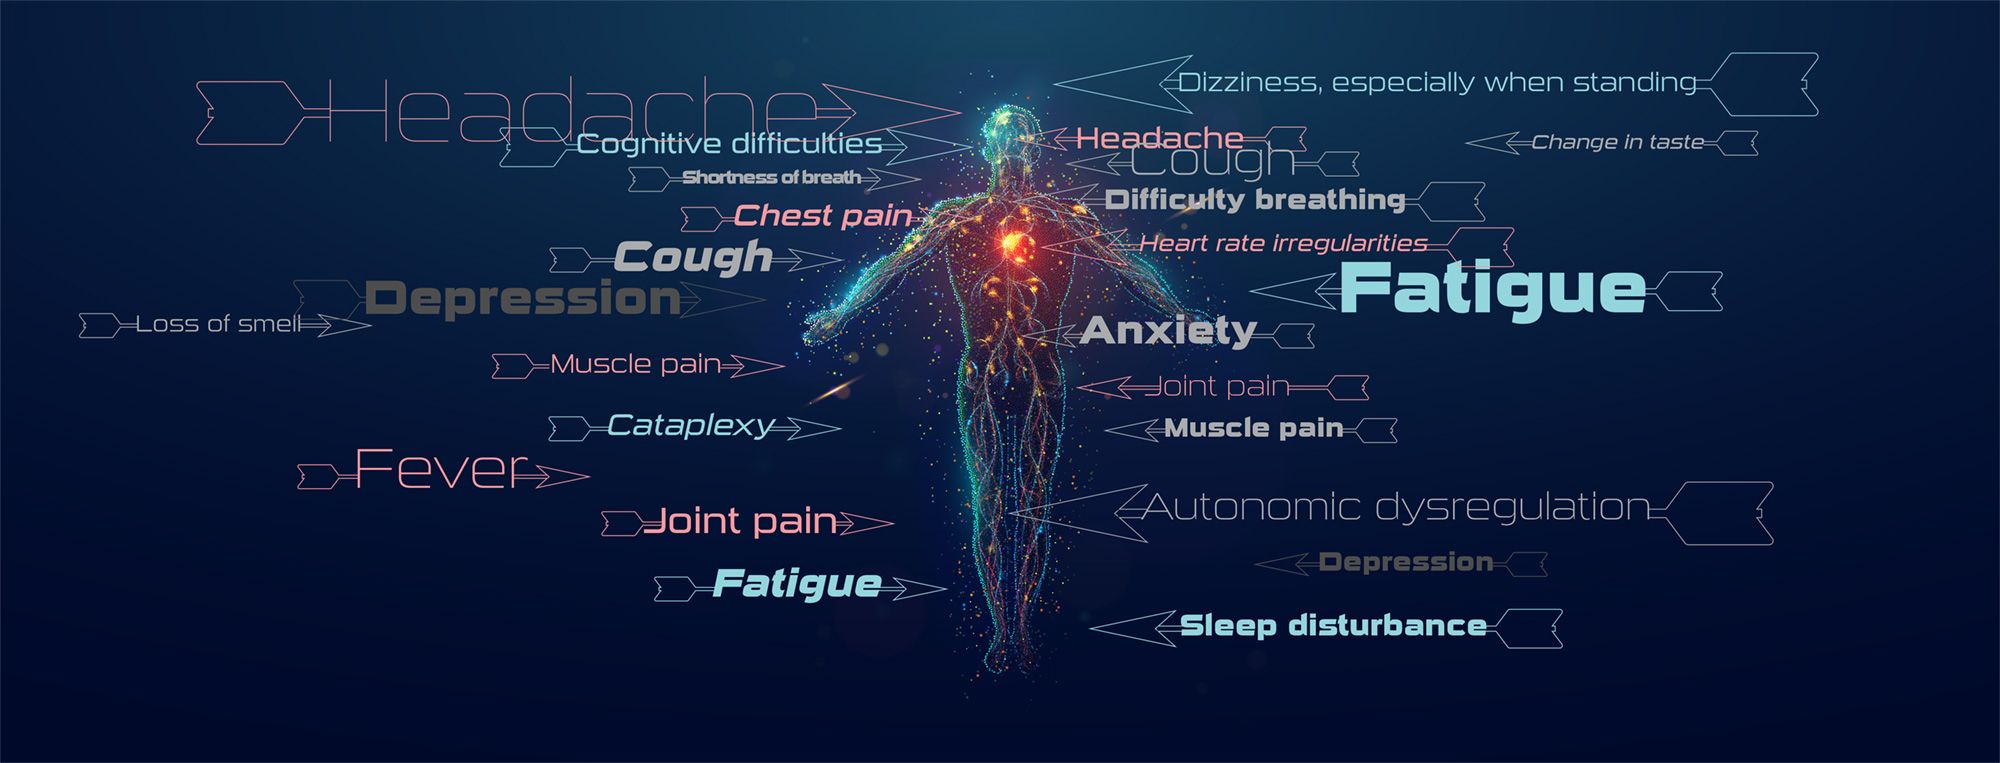 Illustrated word cloud of long-term symptoms of COVID-19